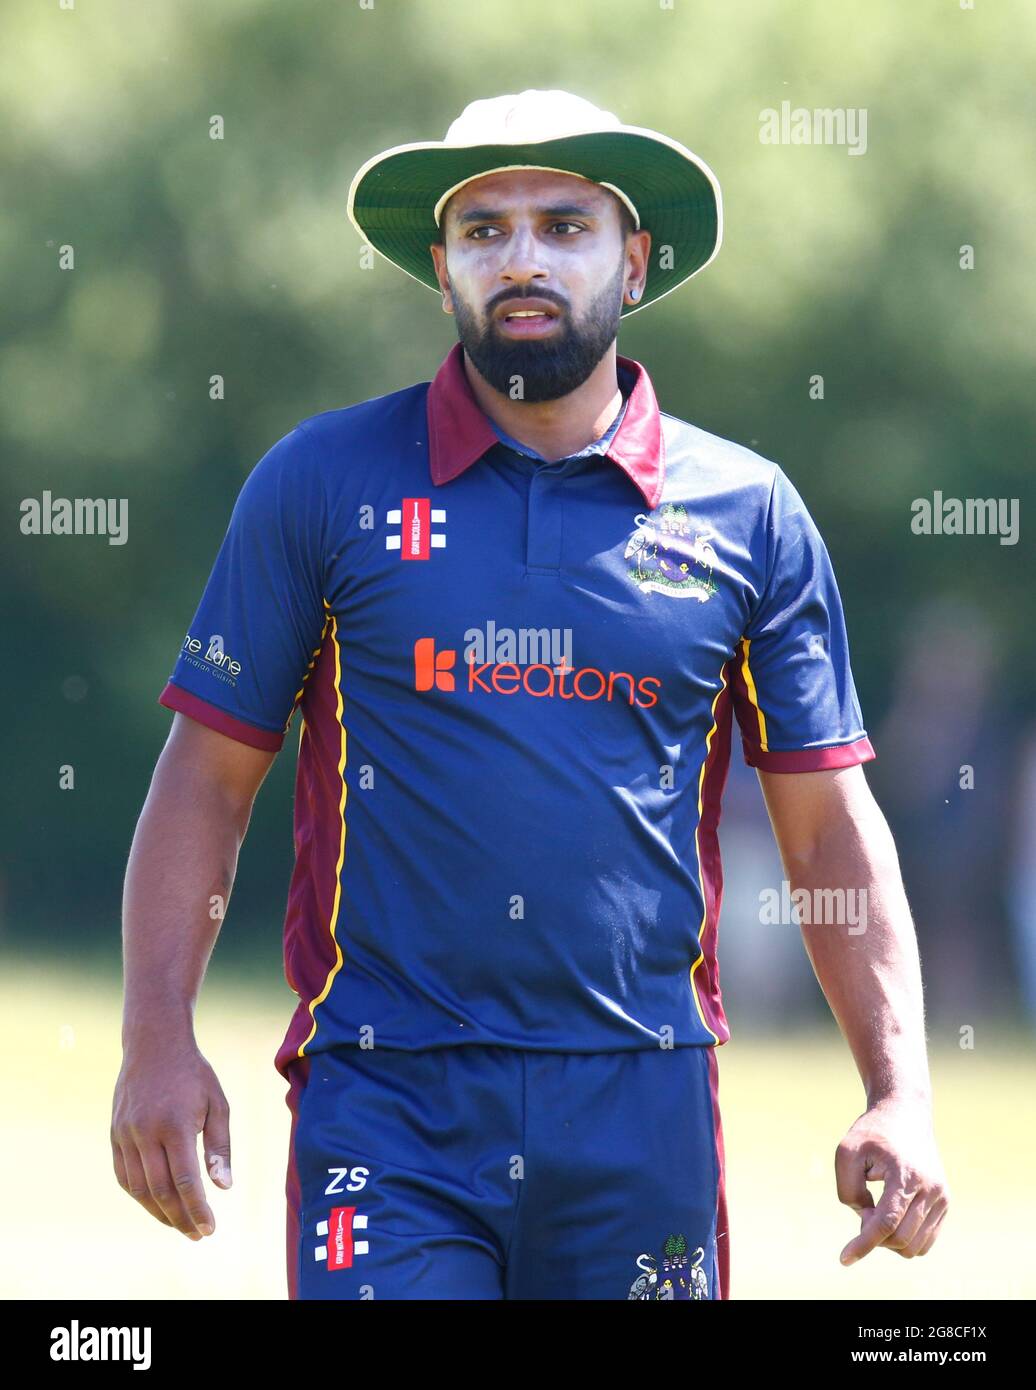 BILLERICAY, United Kingdom, JULY 18: Zain Shazad of Wanstead cc  during    Dukes Essex T20 Competition - Final between Wanstead and Snaresbrook CC and Stock Photo